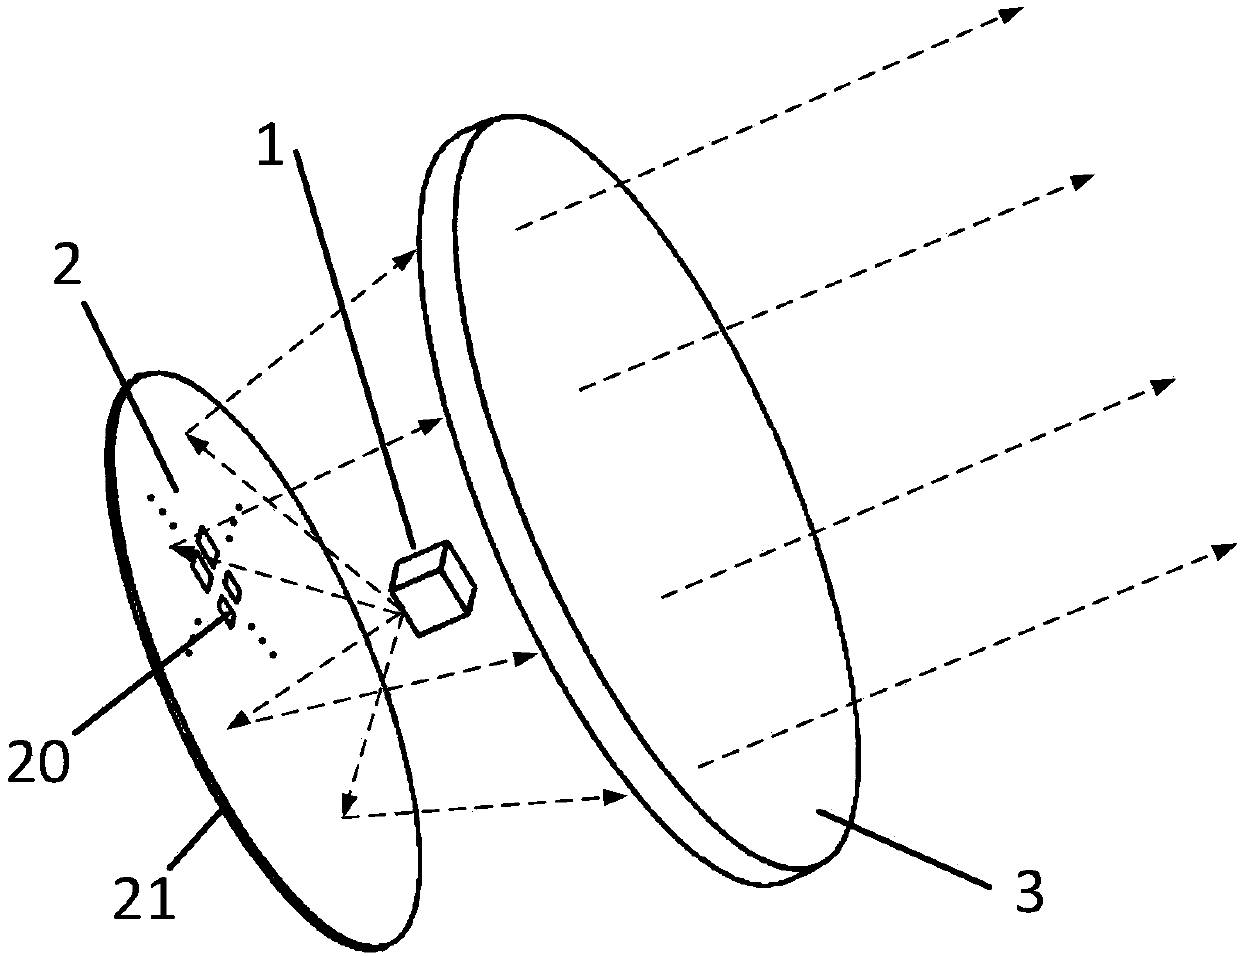 A Low Profile Lens Antenna Based on Reflectarray Feed